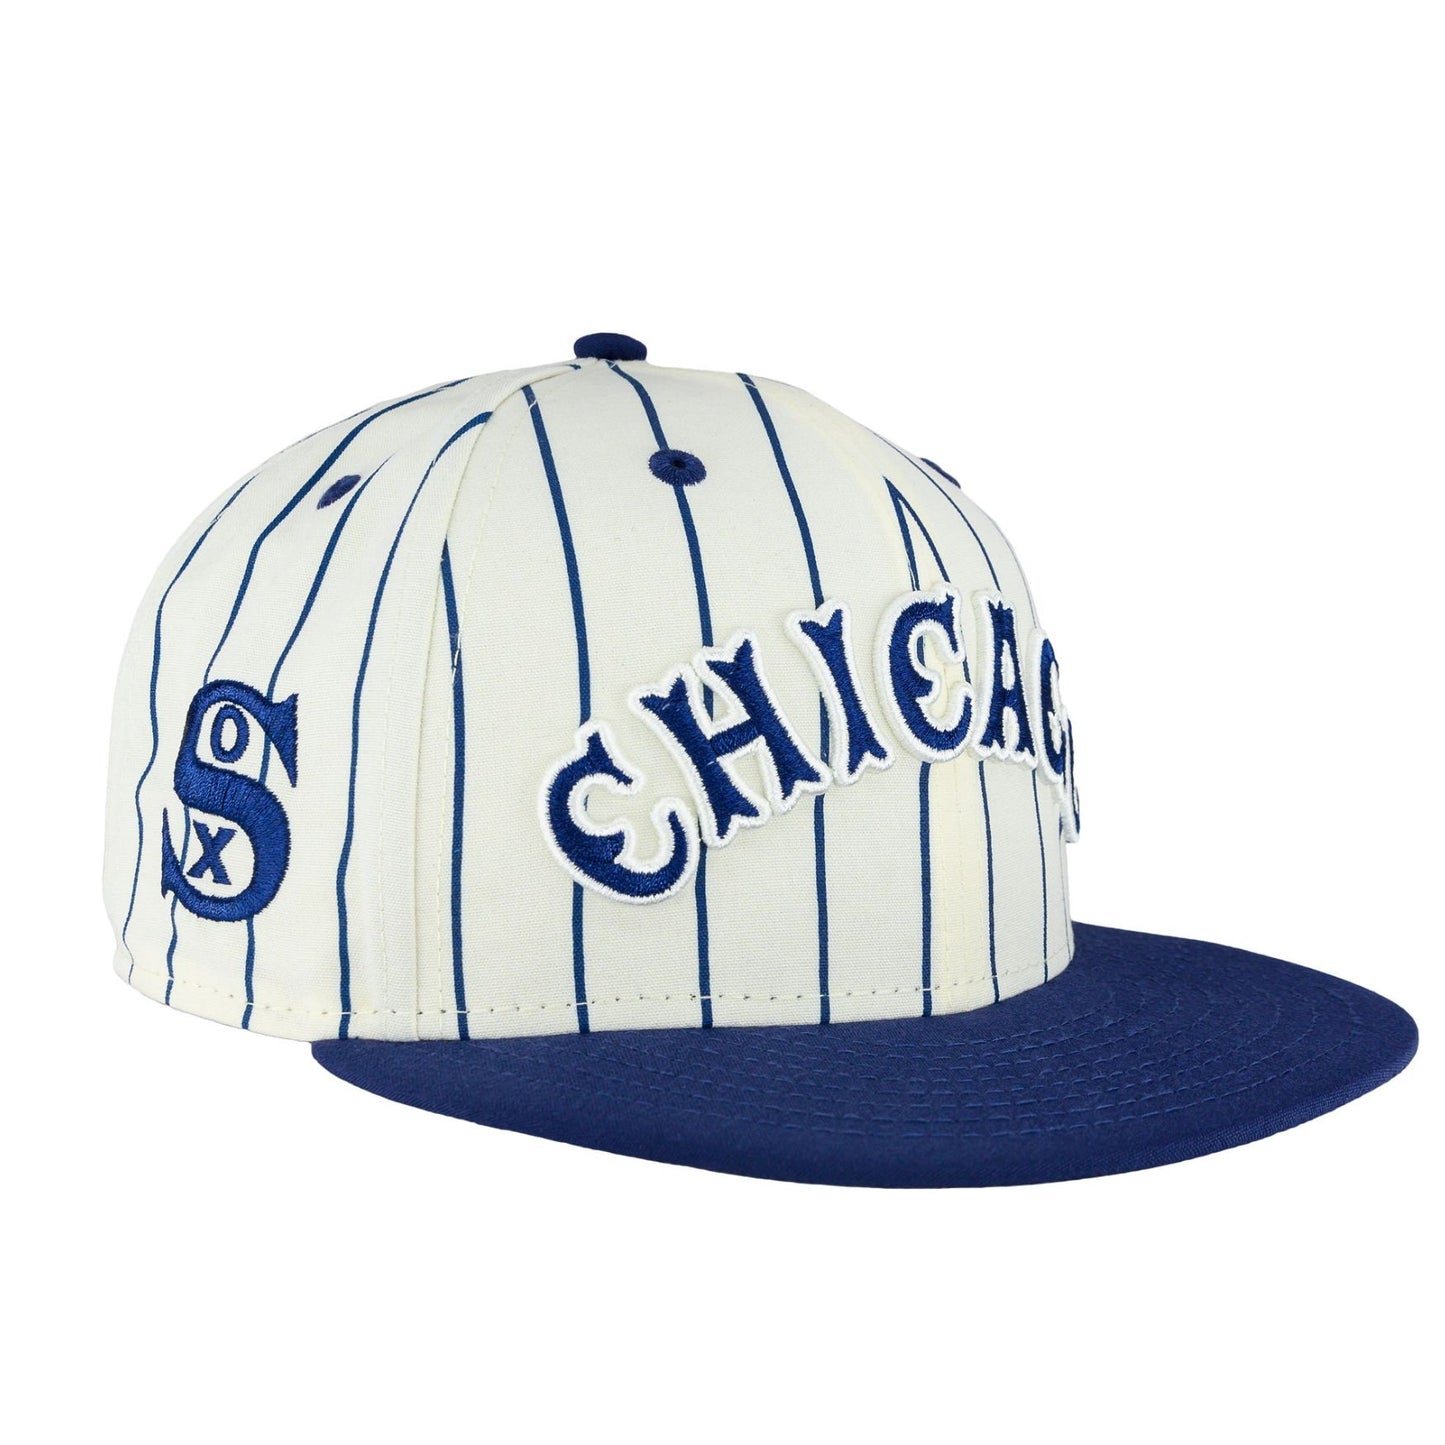 Chicago White Sox Cooperstown 1912 Chrome New Era 9FIFTY Snapback Adjustable Hat